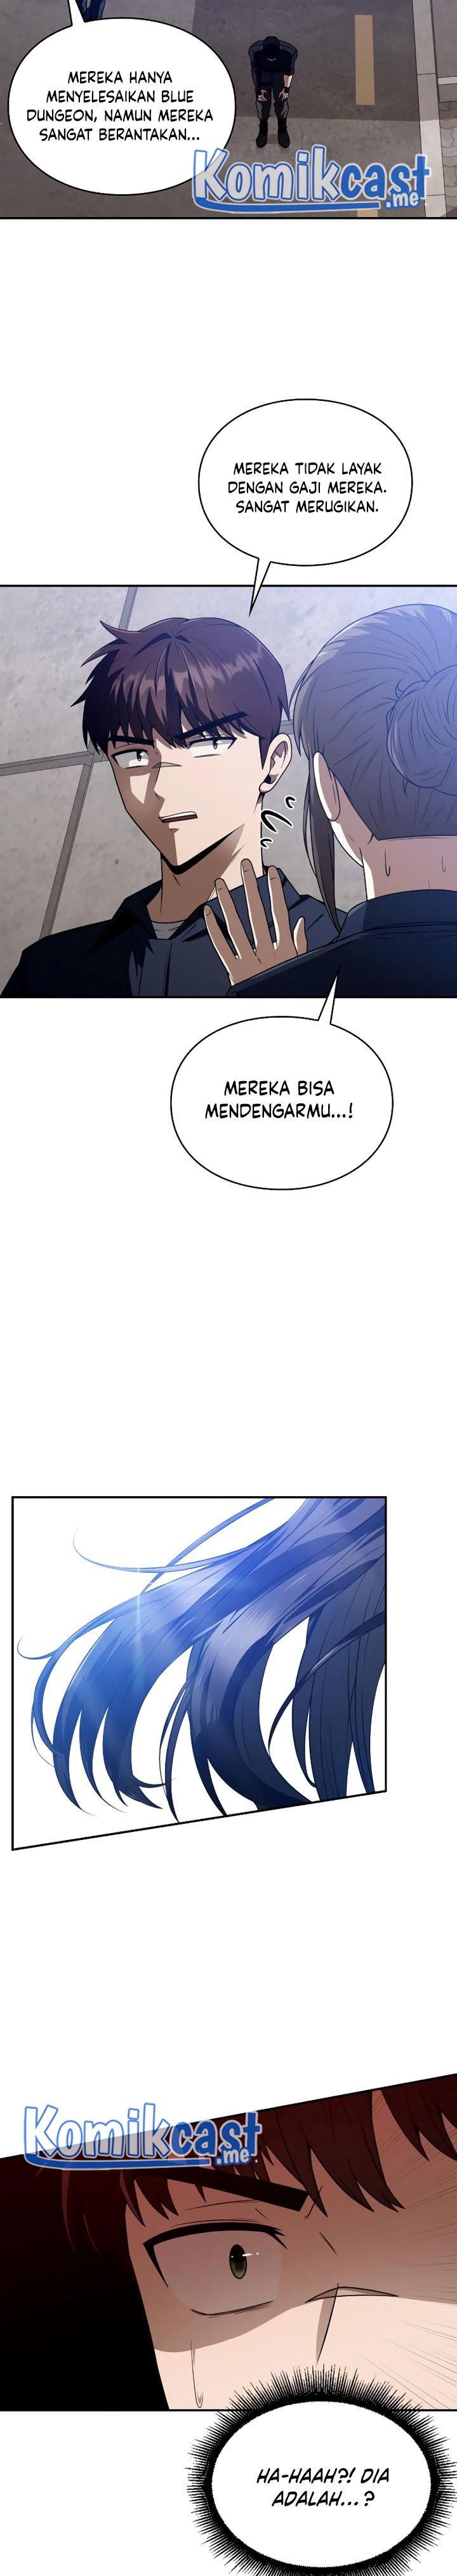 Dilarang COPAS - situs resmi www.mangacanblog.com - Komik clever cleaning life of the returned genius hunter 005 - chapter 5 6 Indonesia clever cleaning life of the returned genius hunter 005 - chapter 5 Terbaru 18|Baca Manga Komik Indonesia|Mangacan